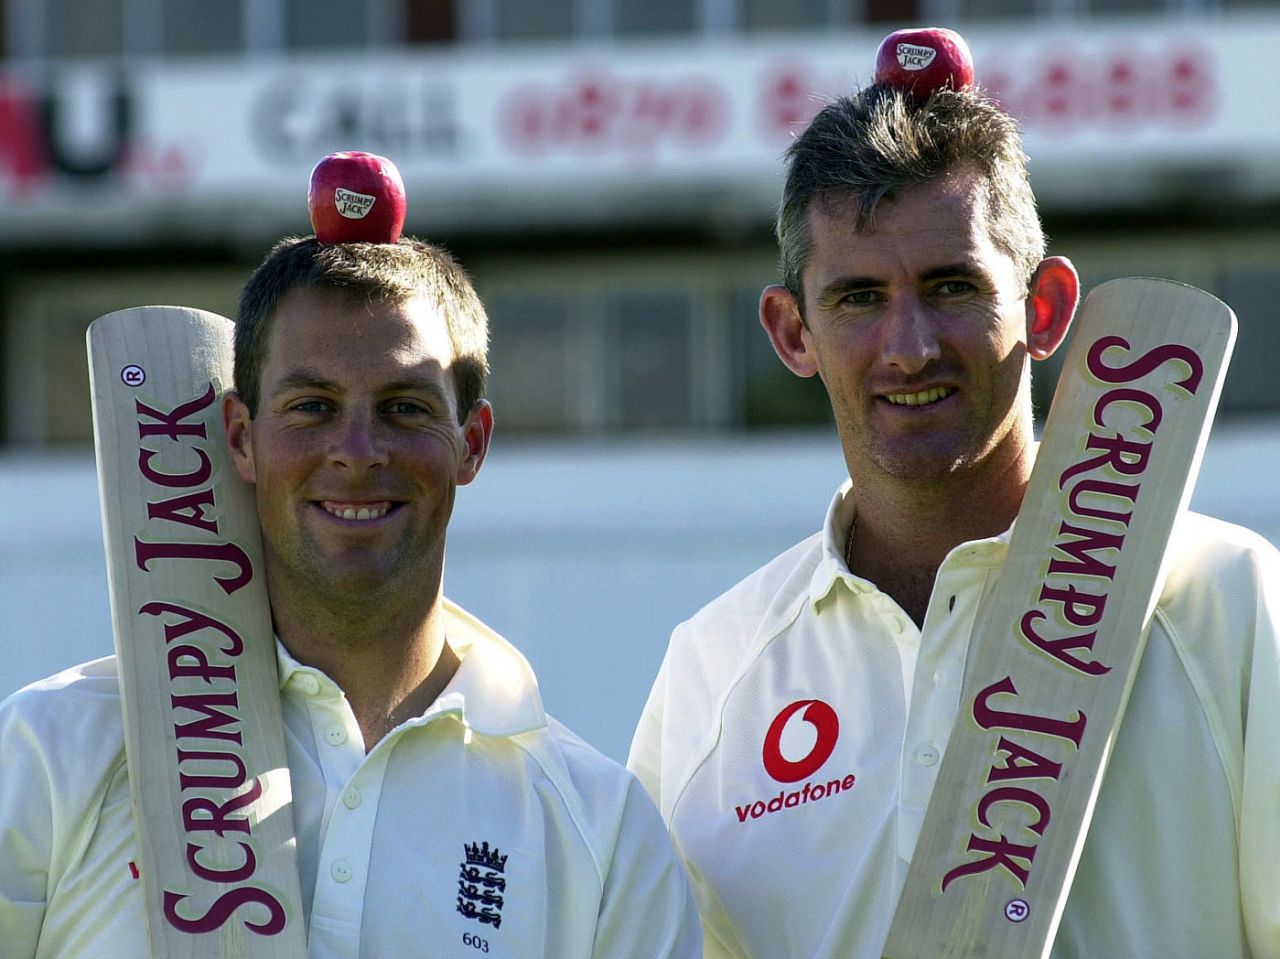 Marcus Trescothick and Andrew Caddick balance apples on their heads during a promotional event, Old Trafford, May 29, 2001